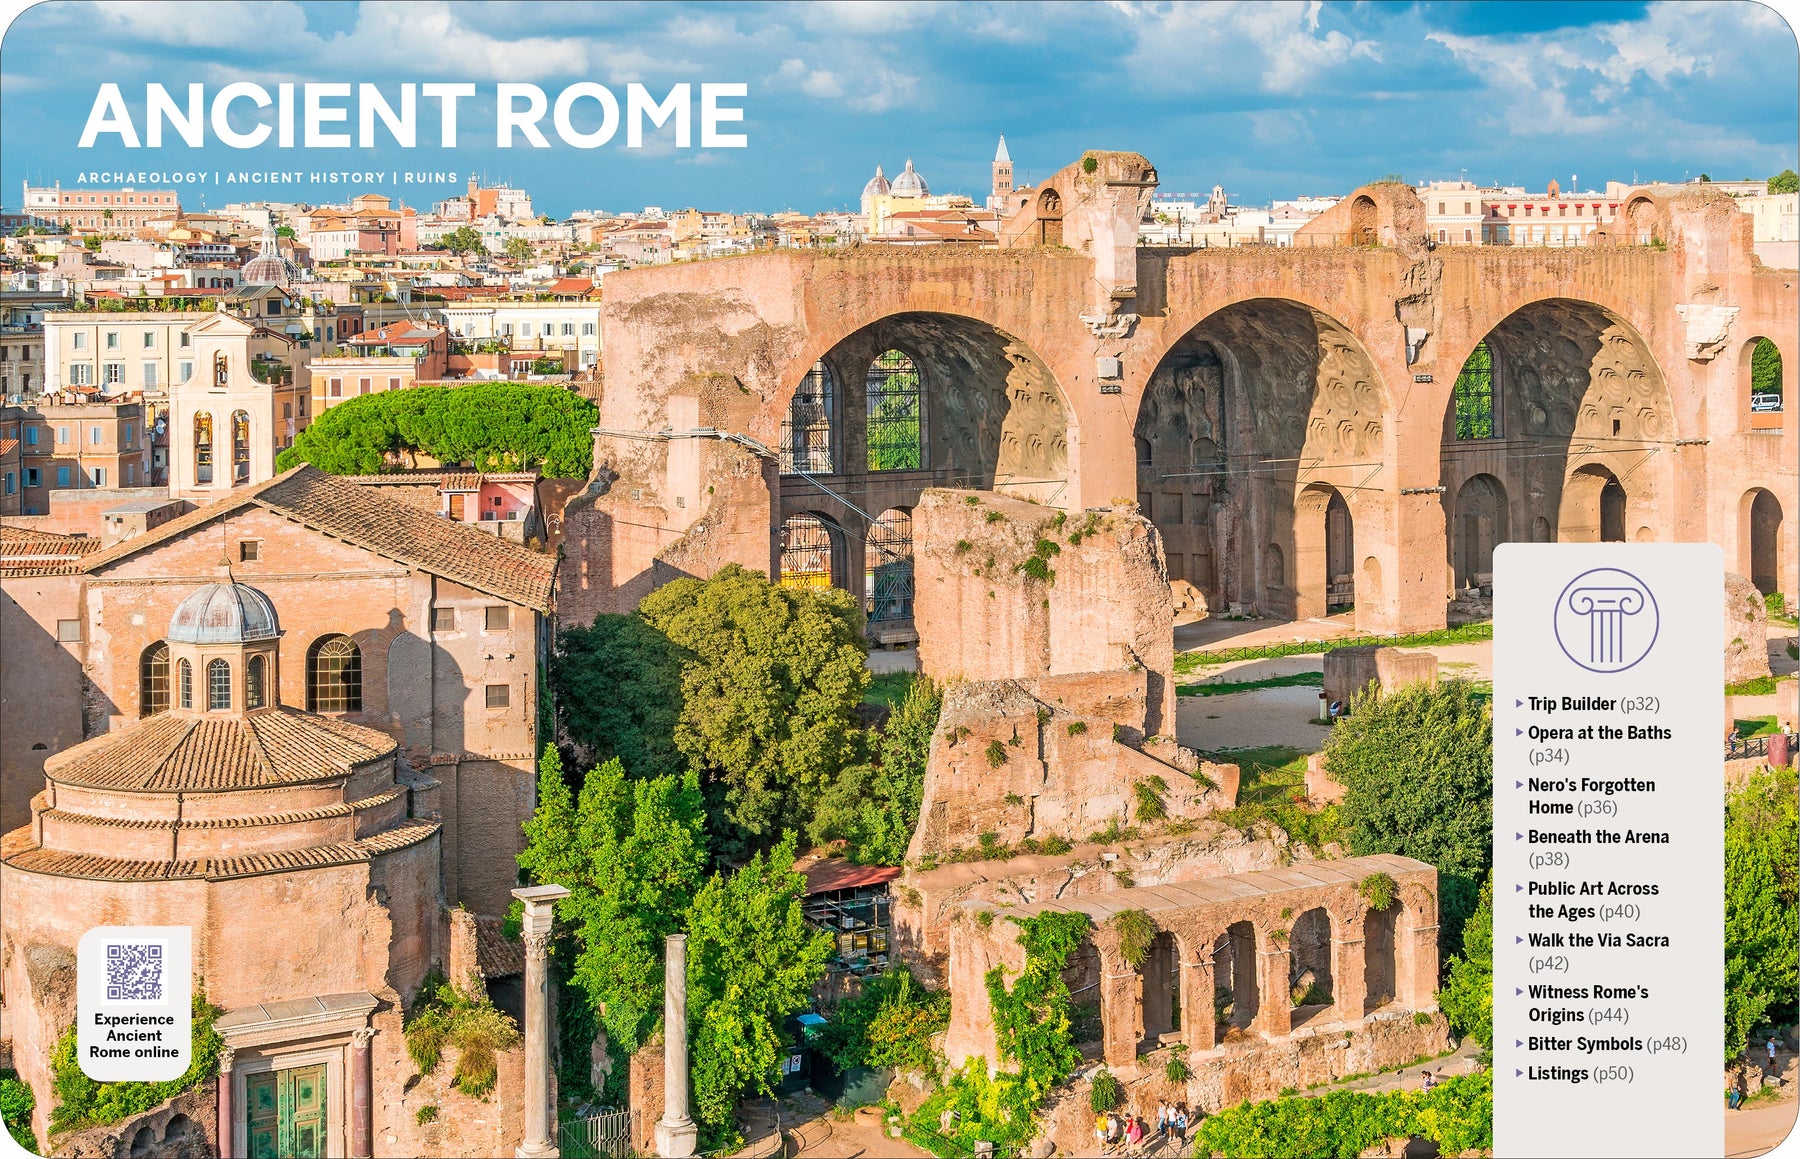 Experience Rome